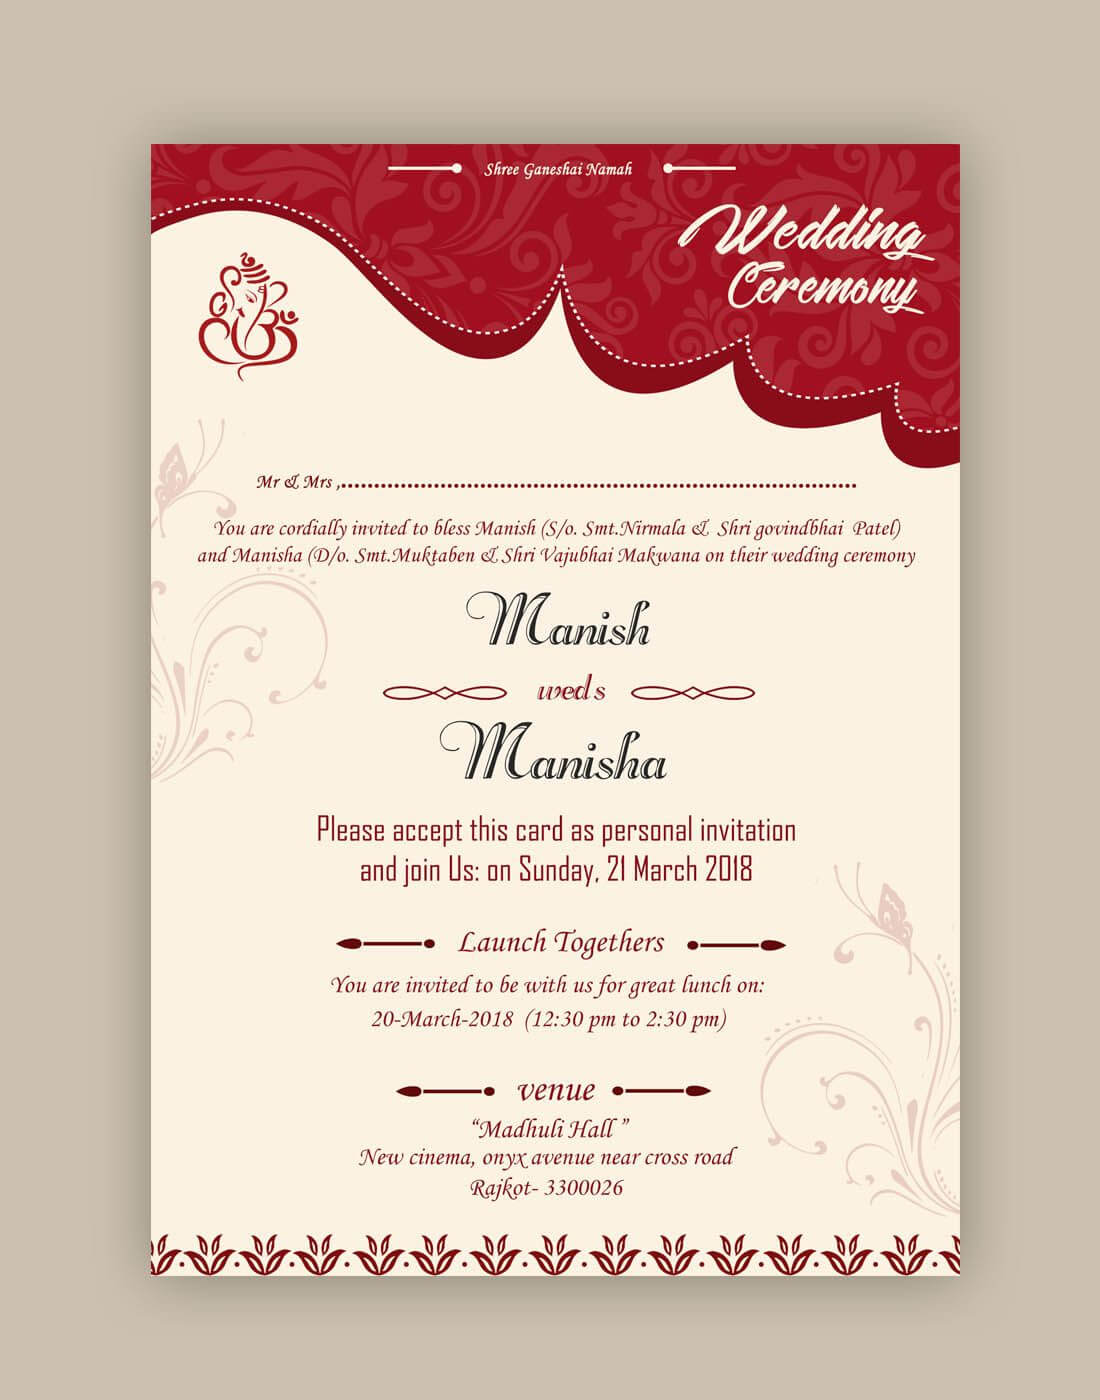 Free Wedding Card Psd Templates In 2020 | Marriage Cards Inside Invitation Cards Templates For Marriage